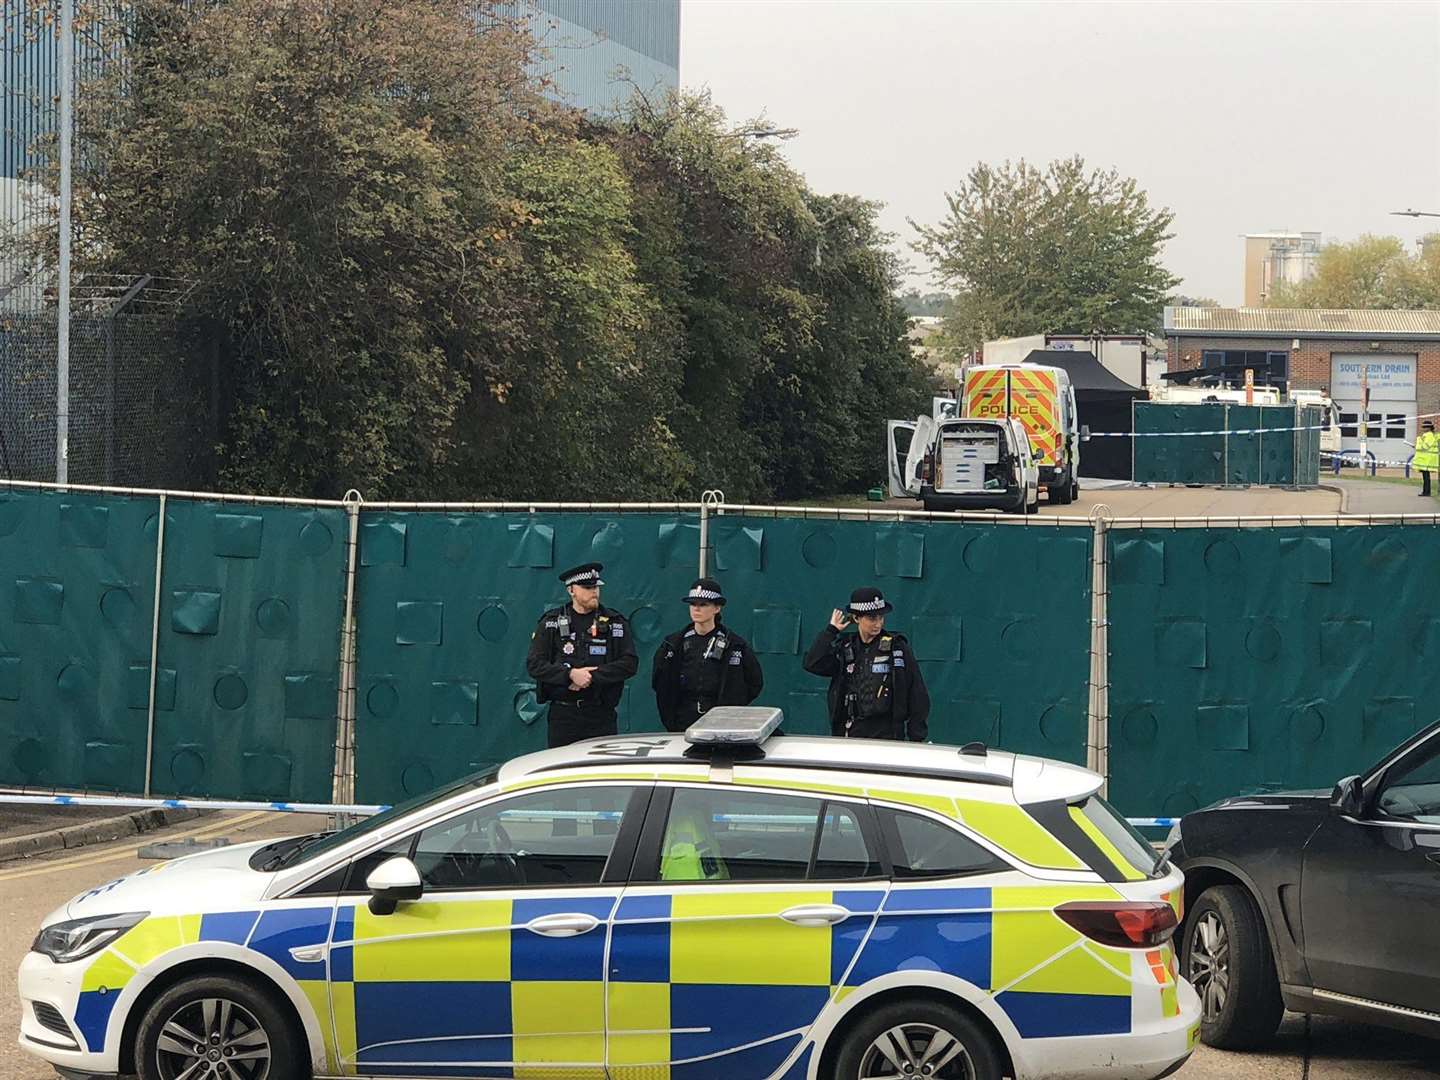 Police at the scene in Essex on October 23. Picture: UKNIP